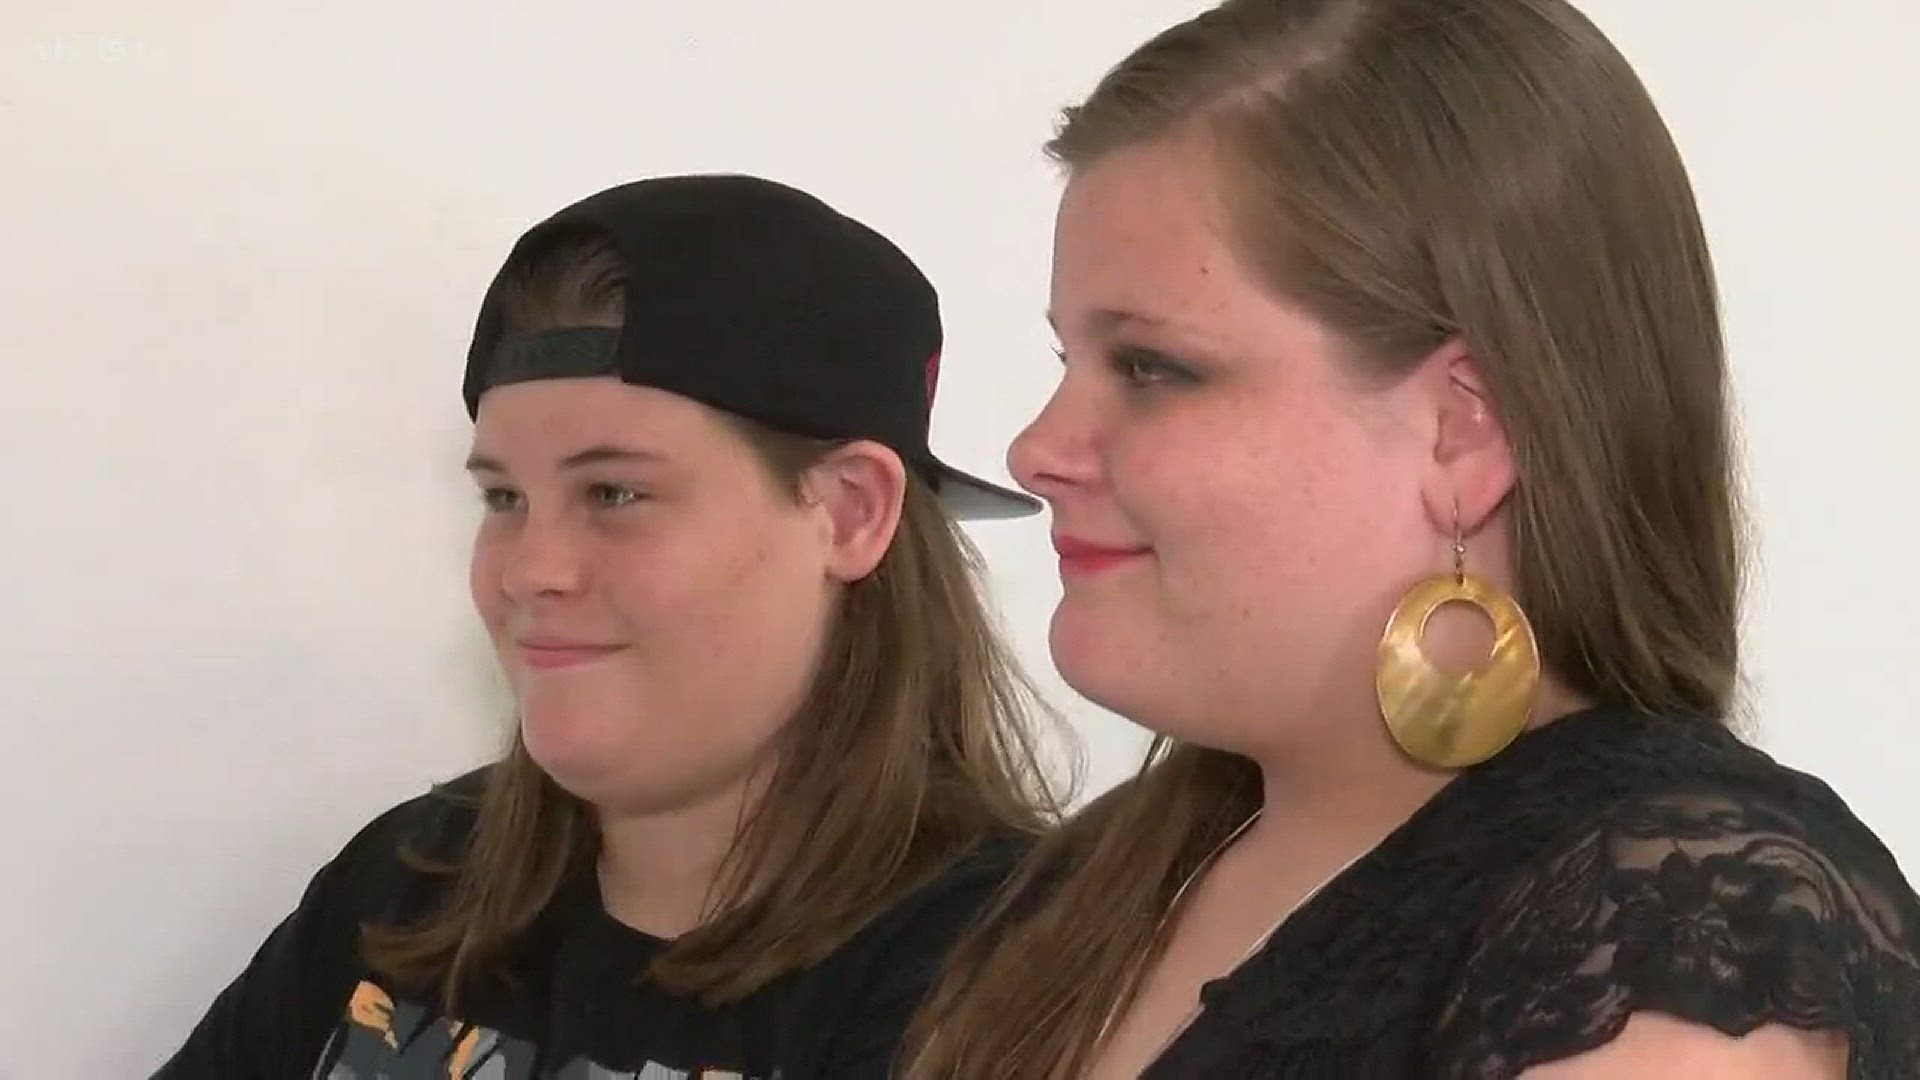 Two sisters hope to be adopted together in a forever family.